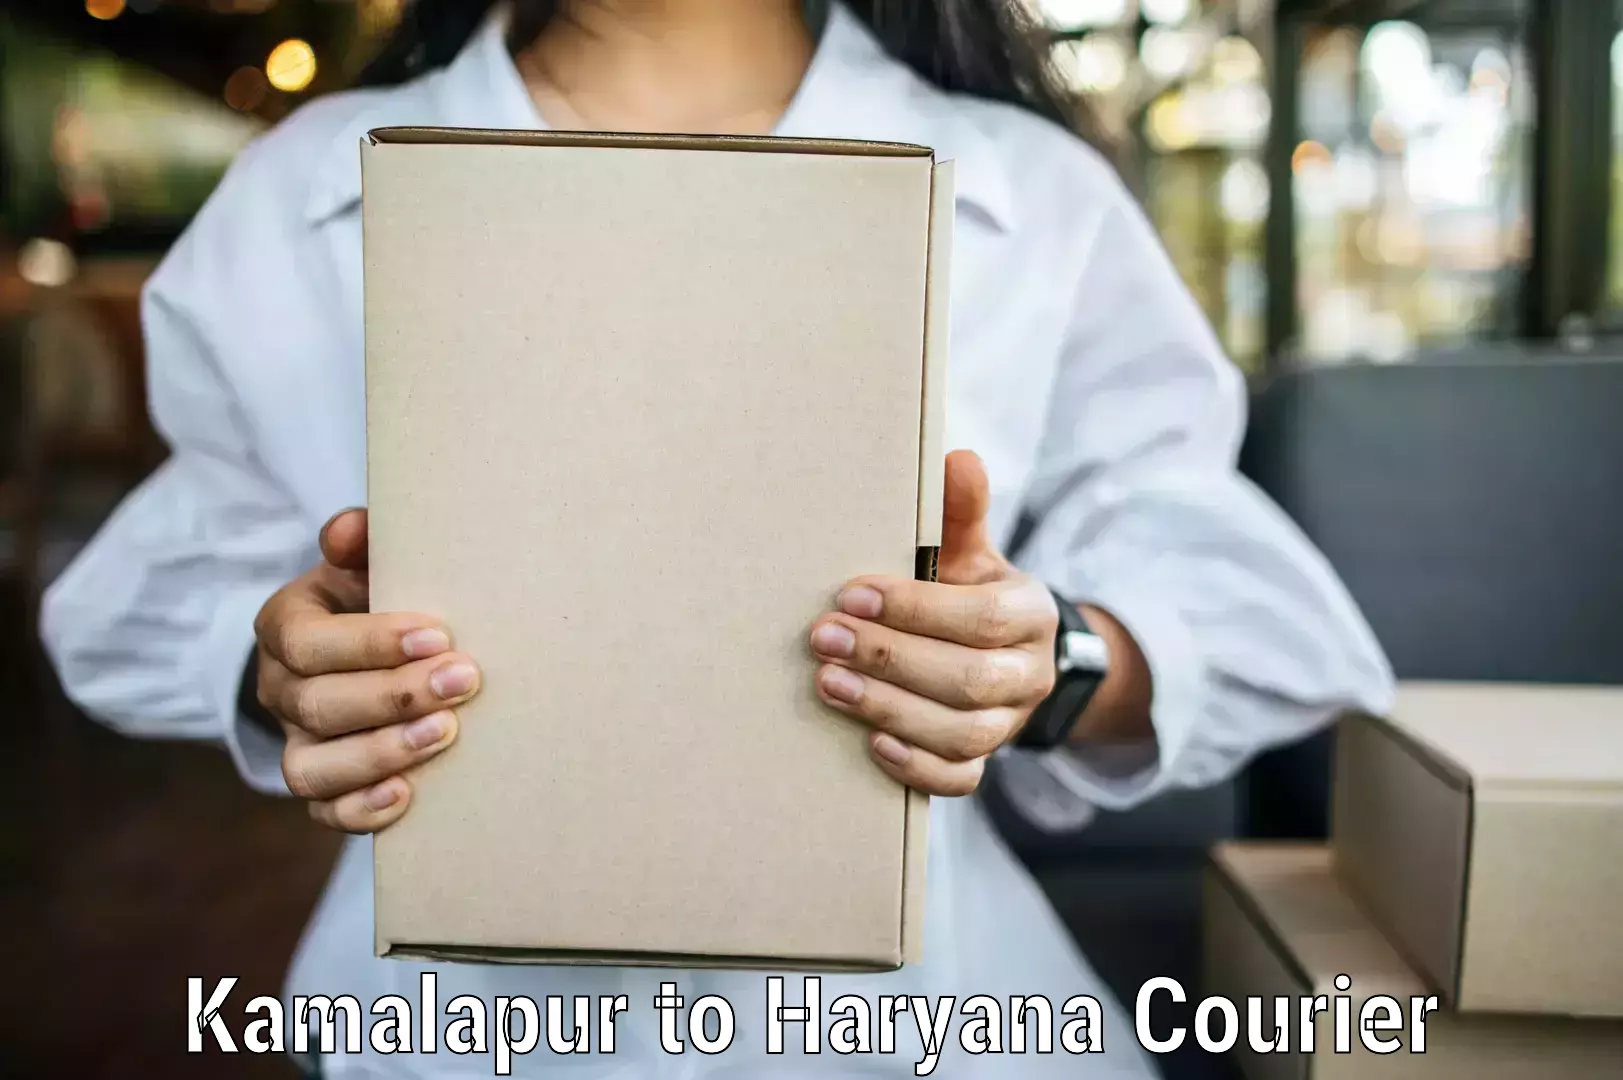 Full-service courier options Kamalapur to Pinjore